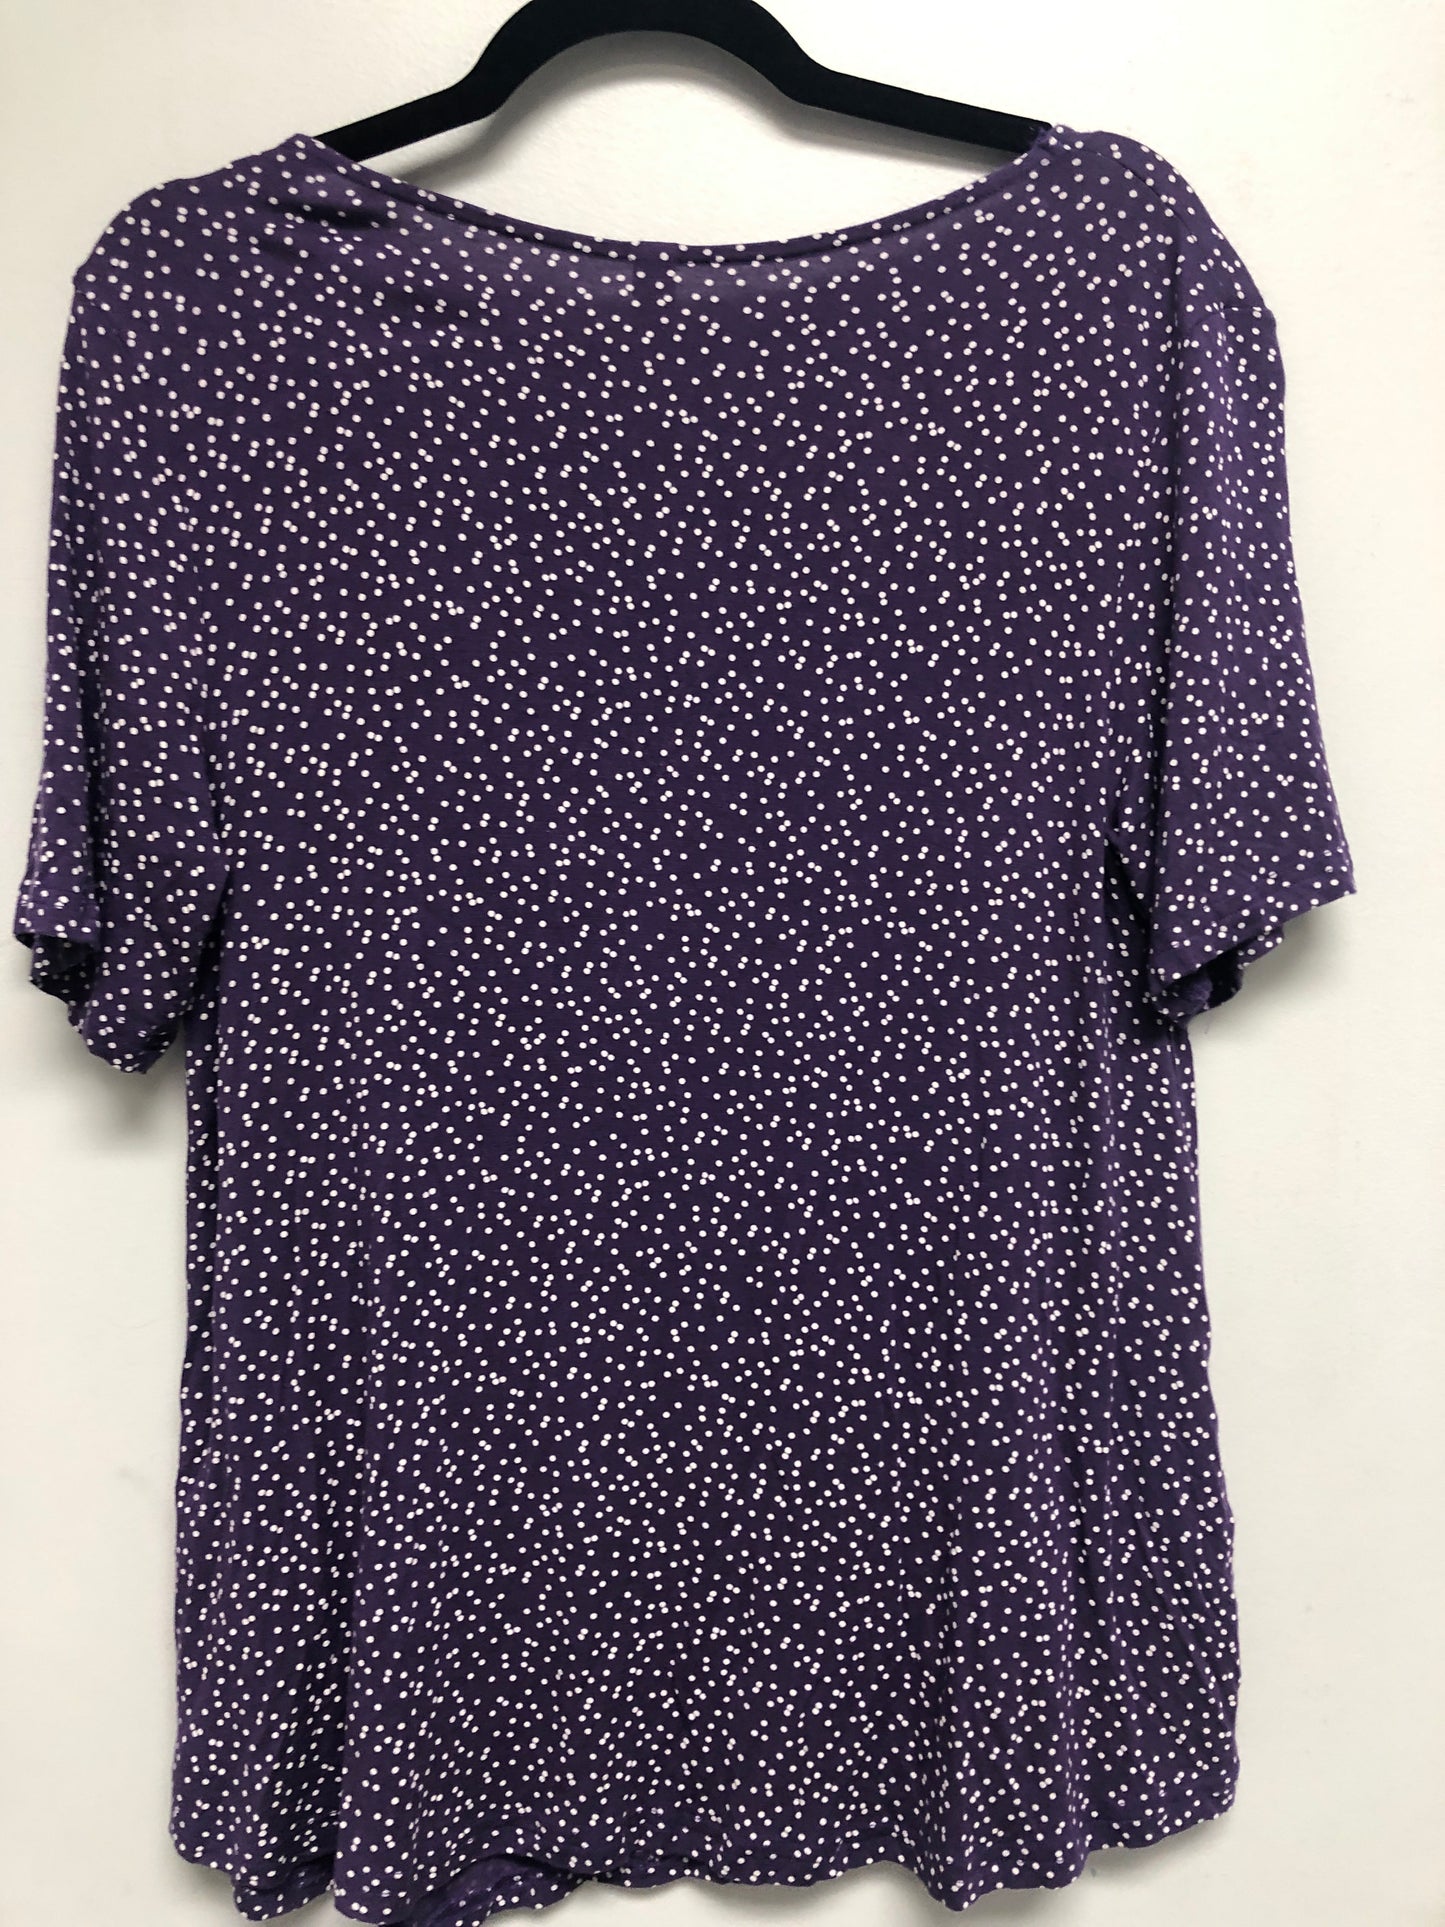 Outlet 6559 - Latched Mama Relaxed Nursing Swing Tee - Purple Dots - Large